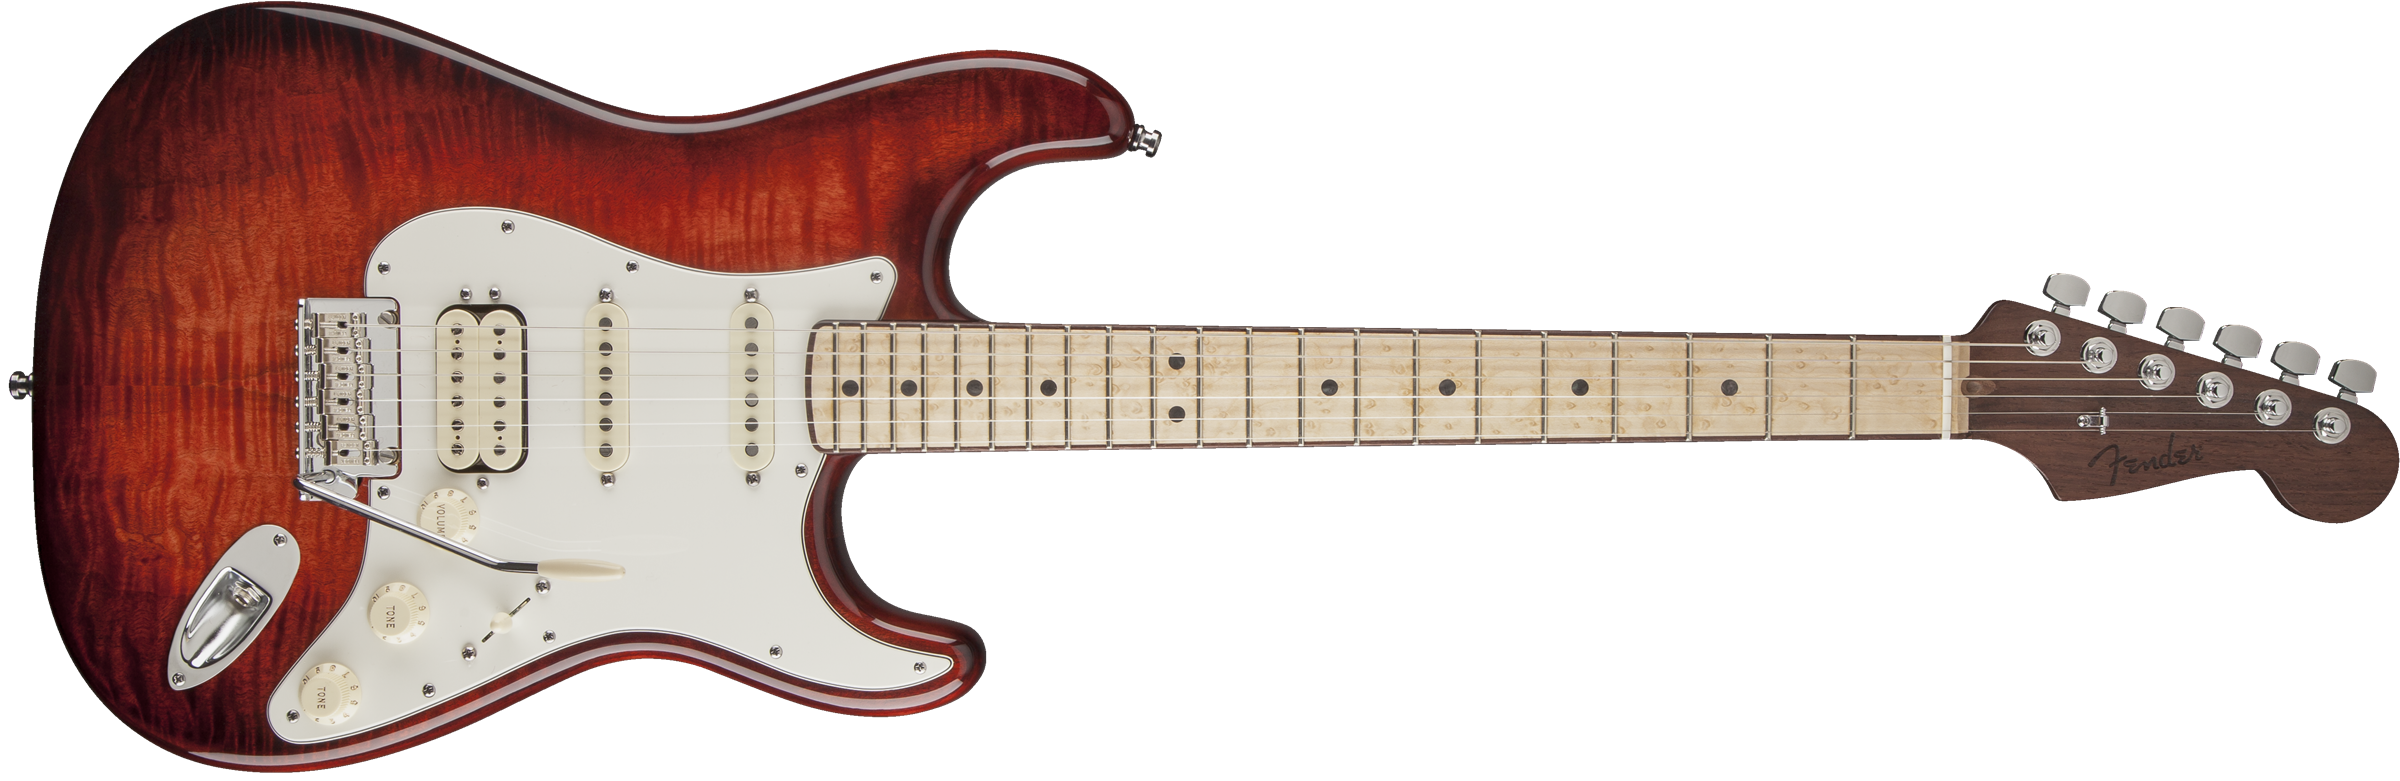 Fender® Select Stratocaster® HSS Exotic Maple Flame, Channel-Bound Maple Fingerboard, Bing Cherry Burst